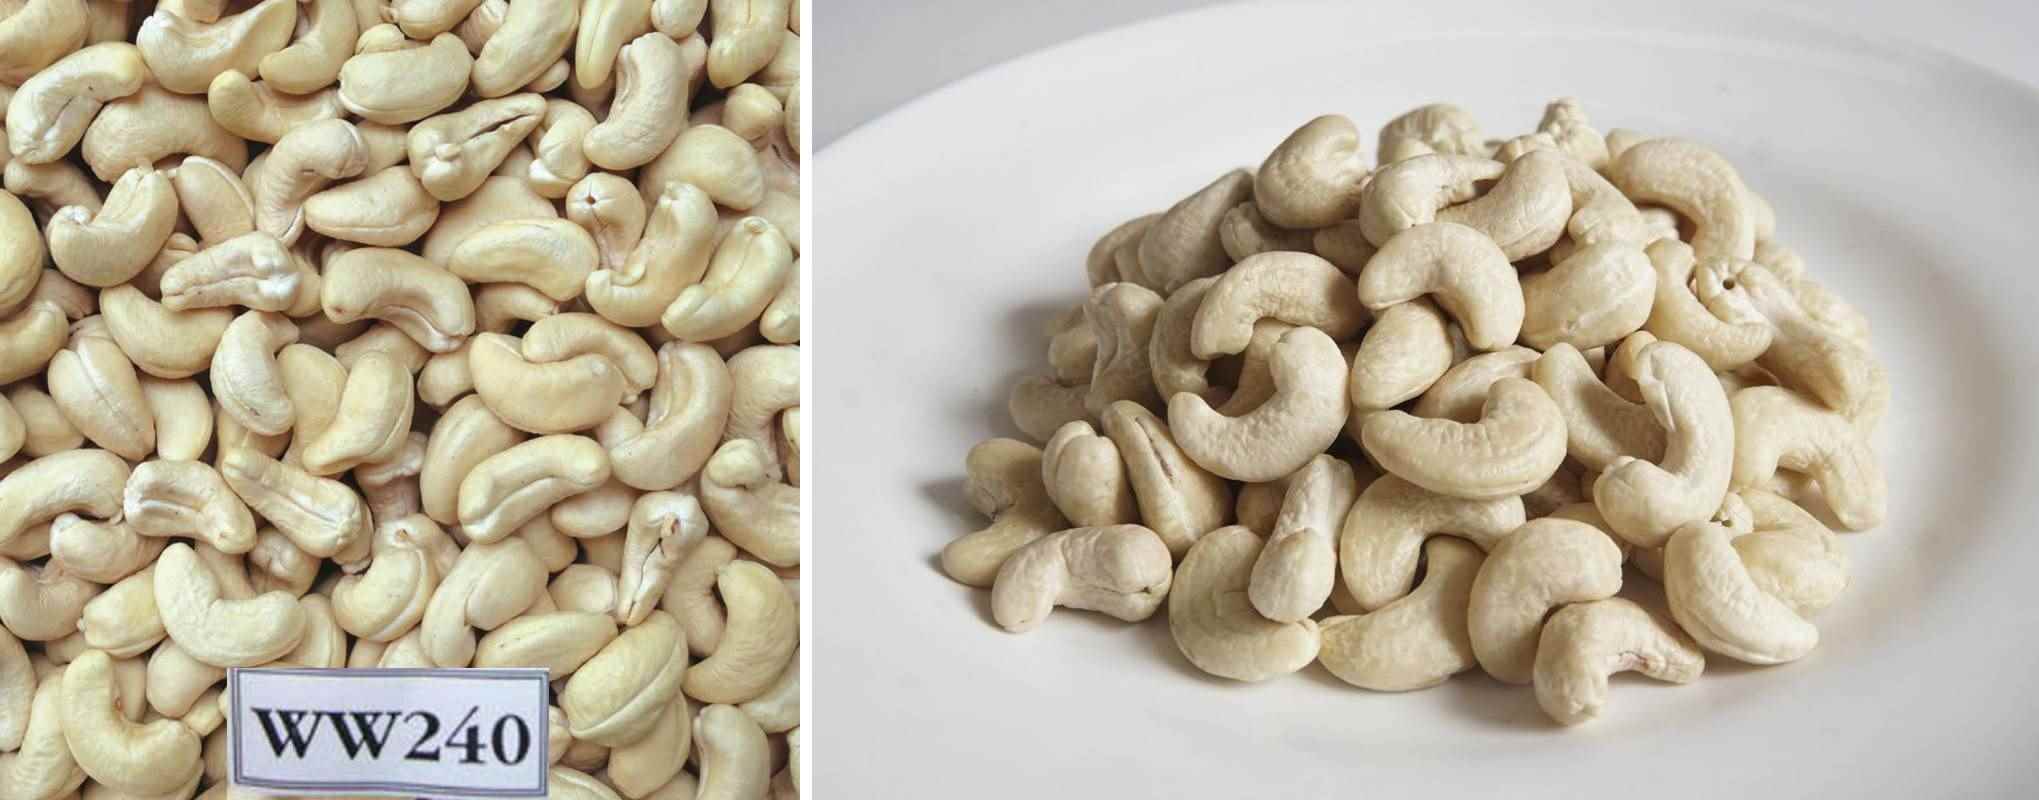 Cashew nut ww240 grade is a large, white, whole cashew that has between 220 and 240 nuts/pound (395 – 465 beans/kg) and is known internationally as Premium Large Nuts. 